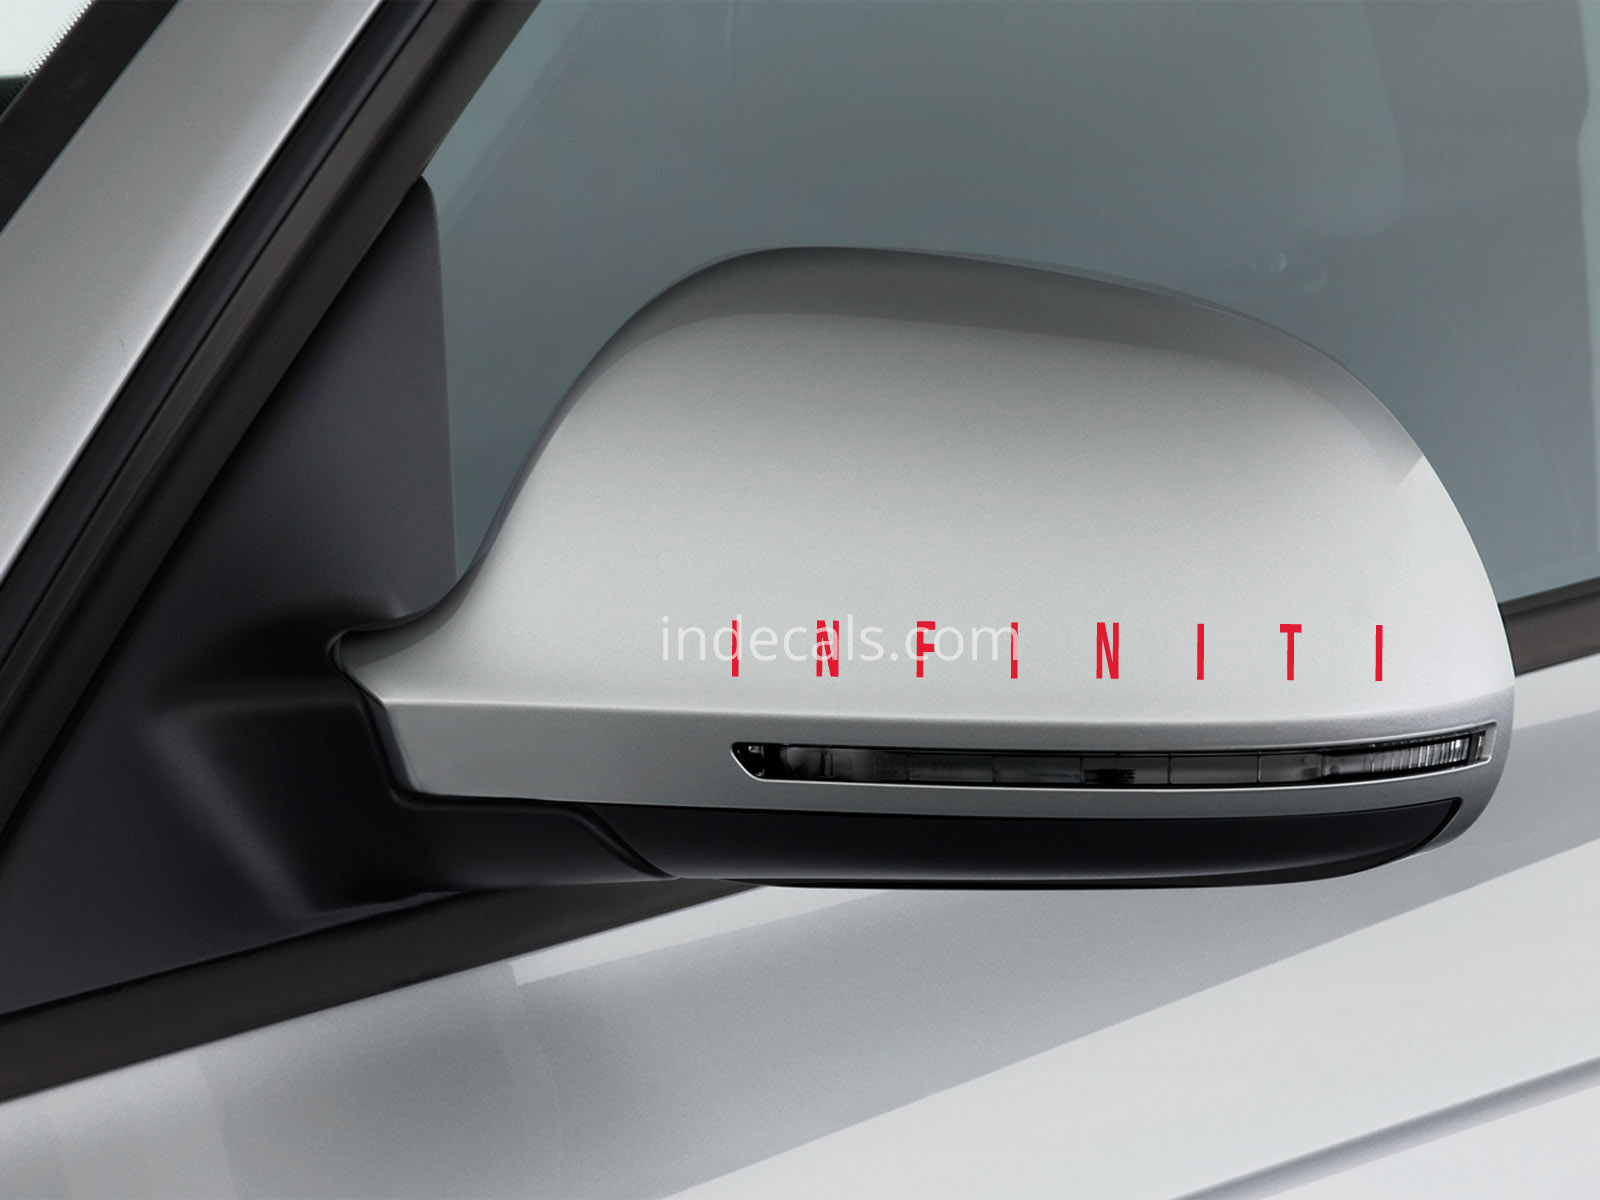 3 x Infiniti Stickers for Mirrors - Red